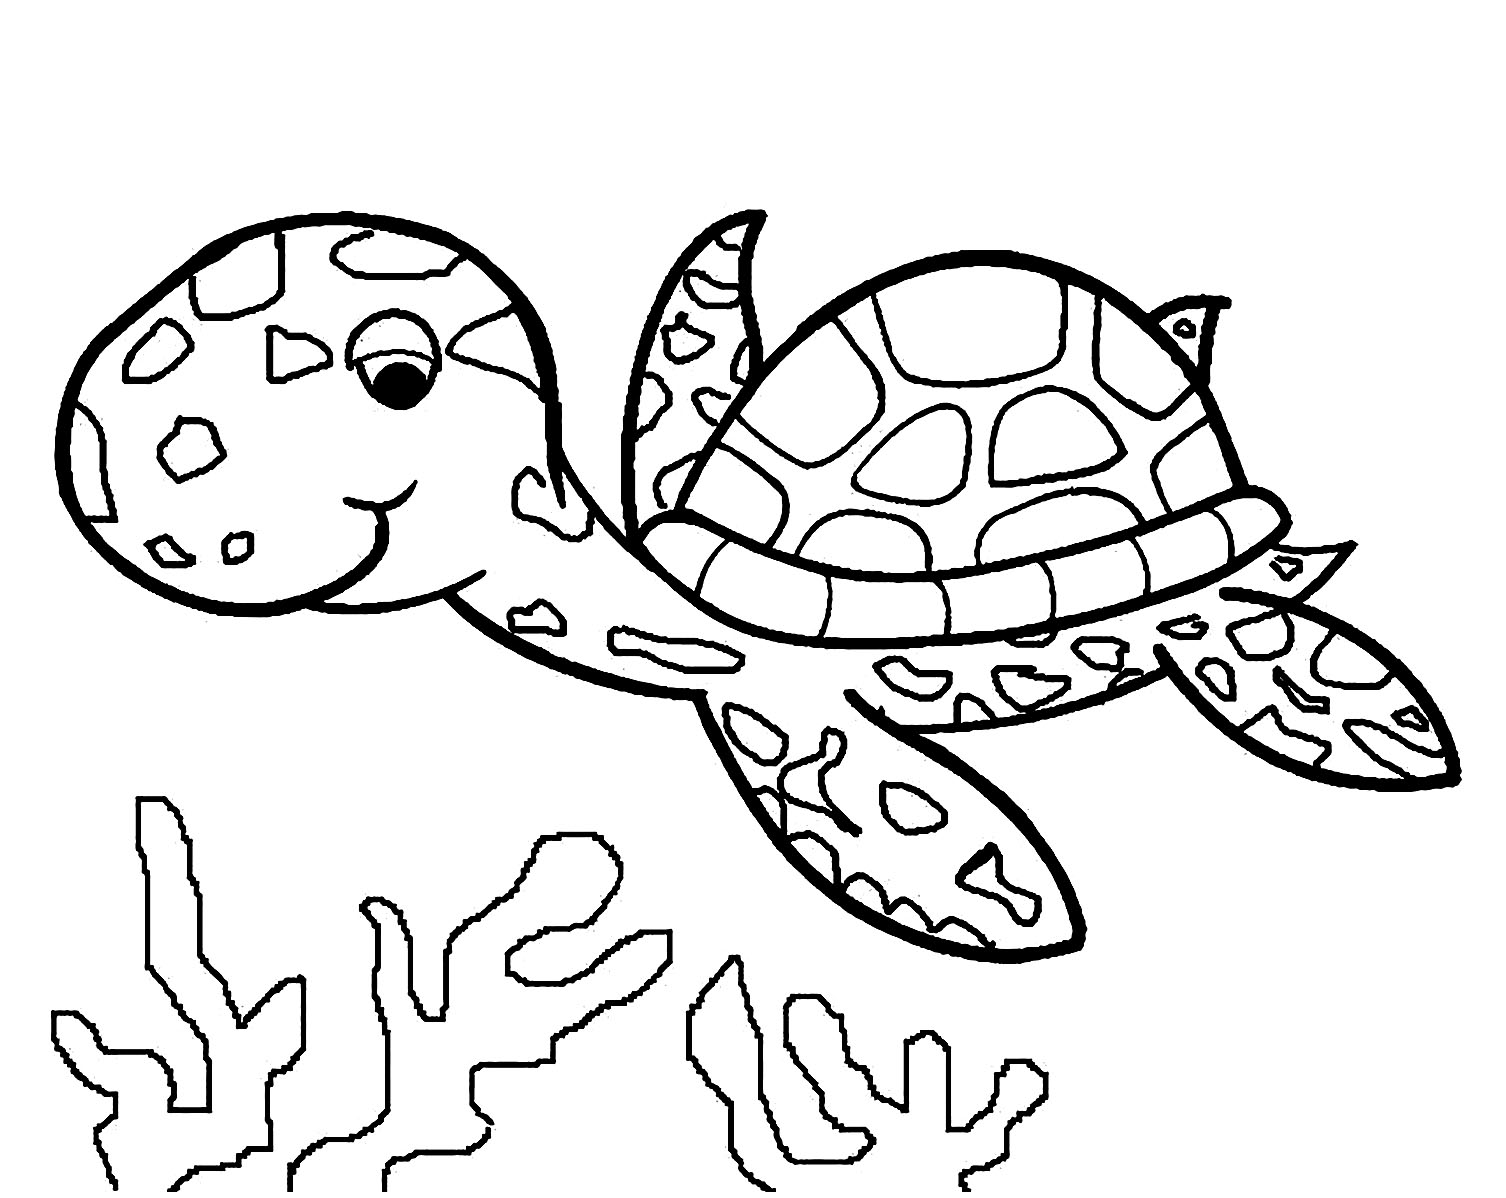 free printable sea turtle coloring pages